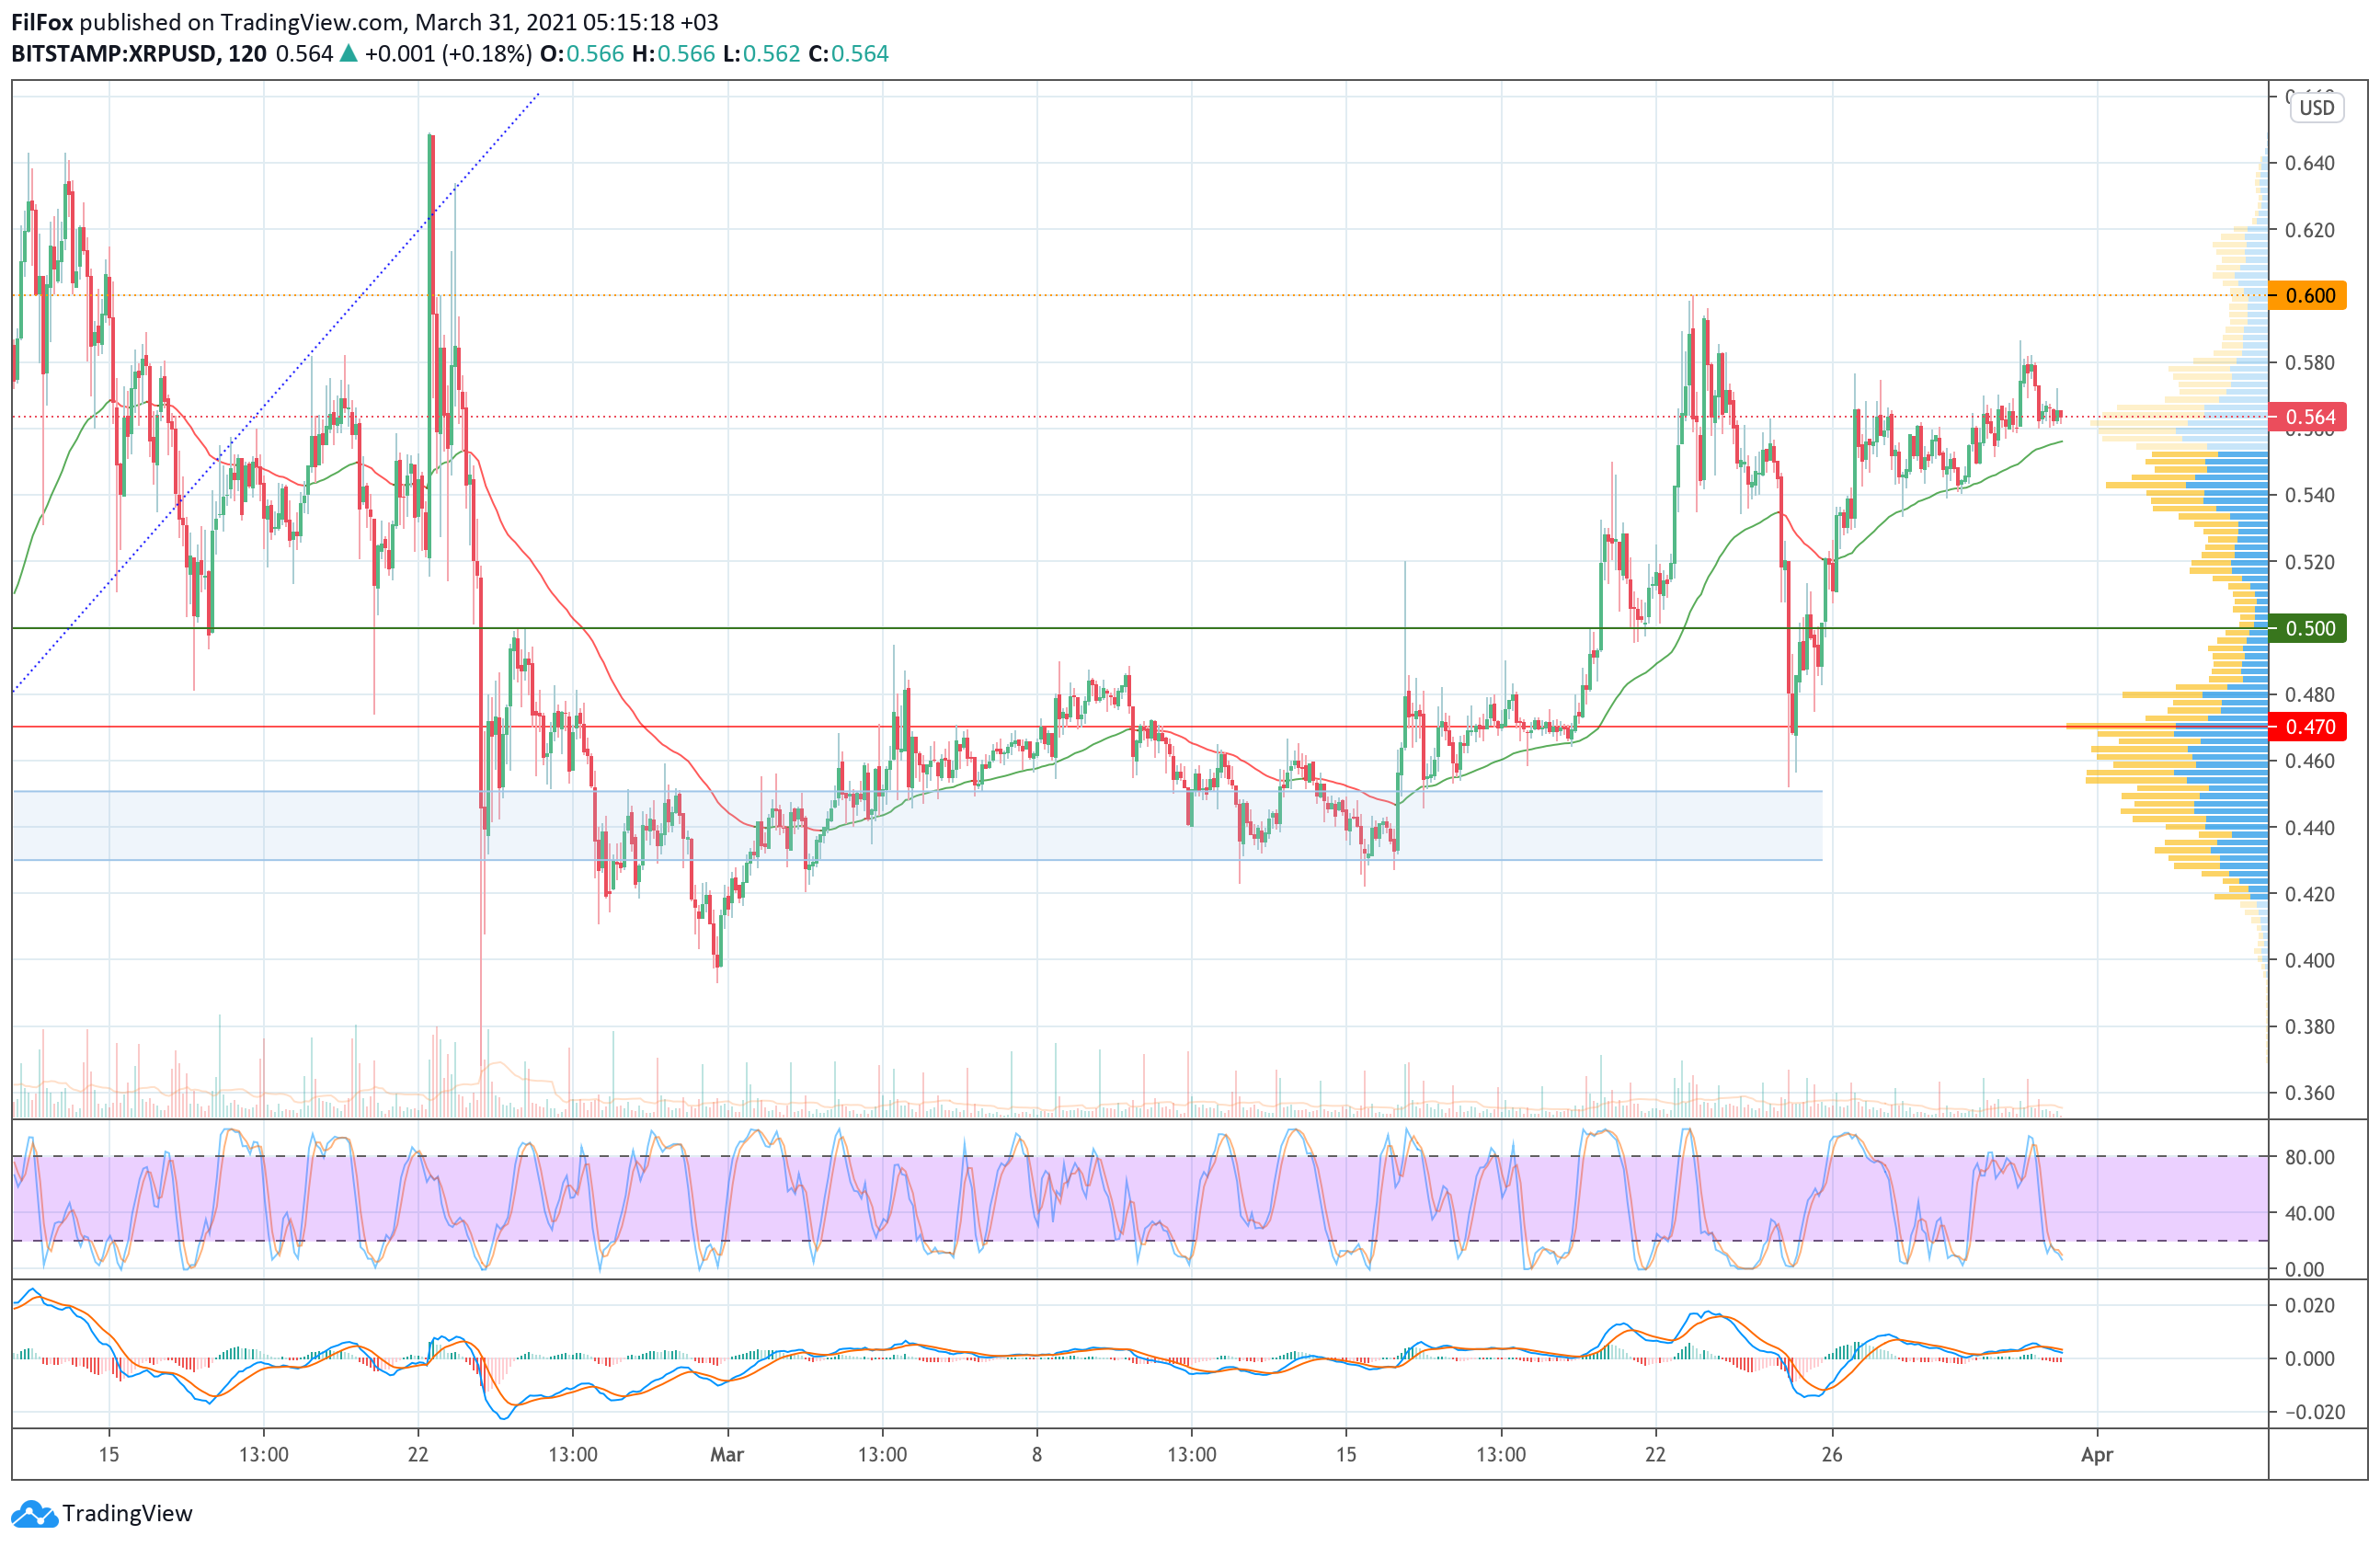 Analysis of the prices of Bitcoin, Ethereum, XRP for 03/31/2021